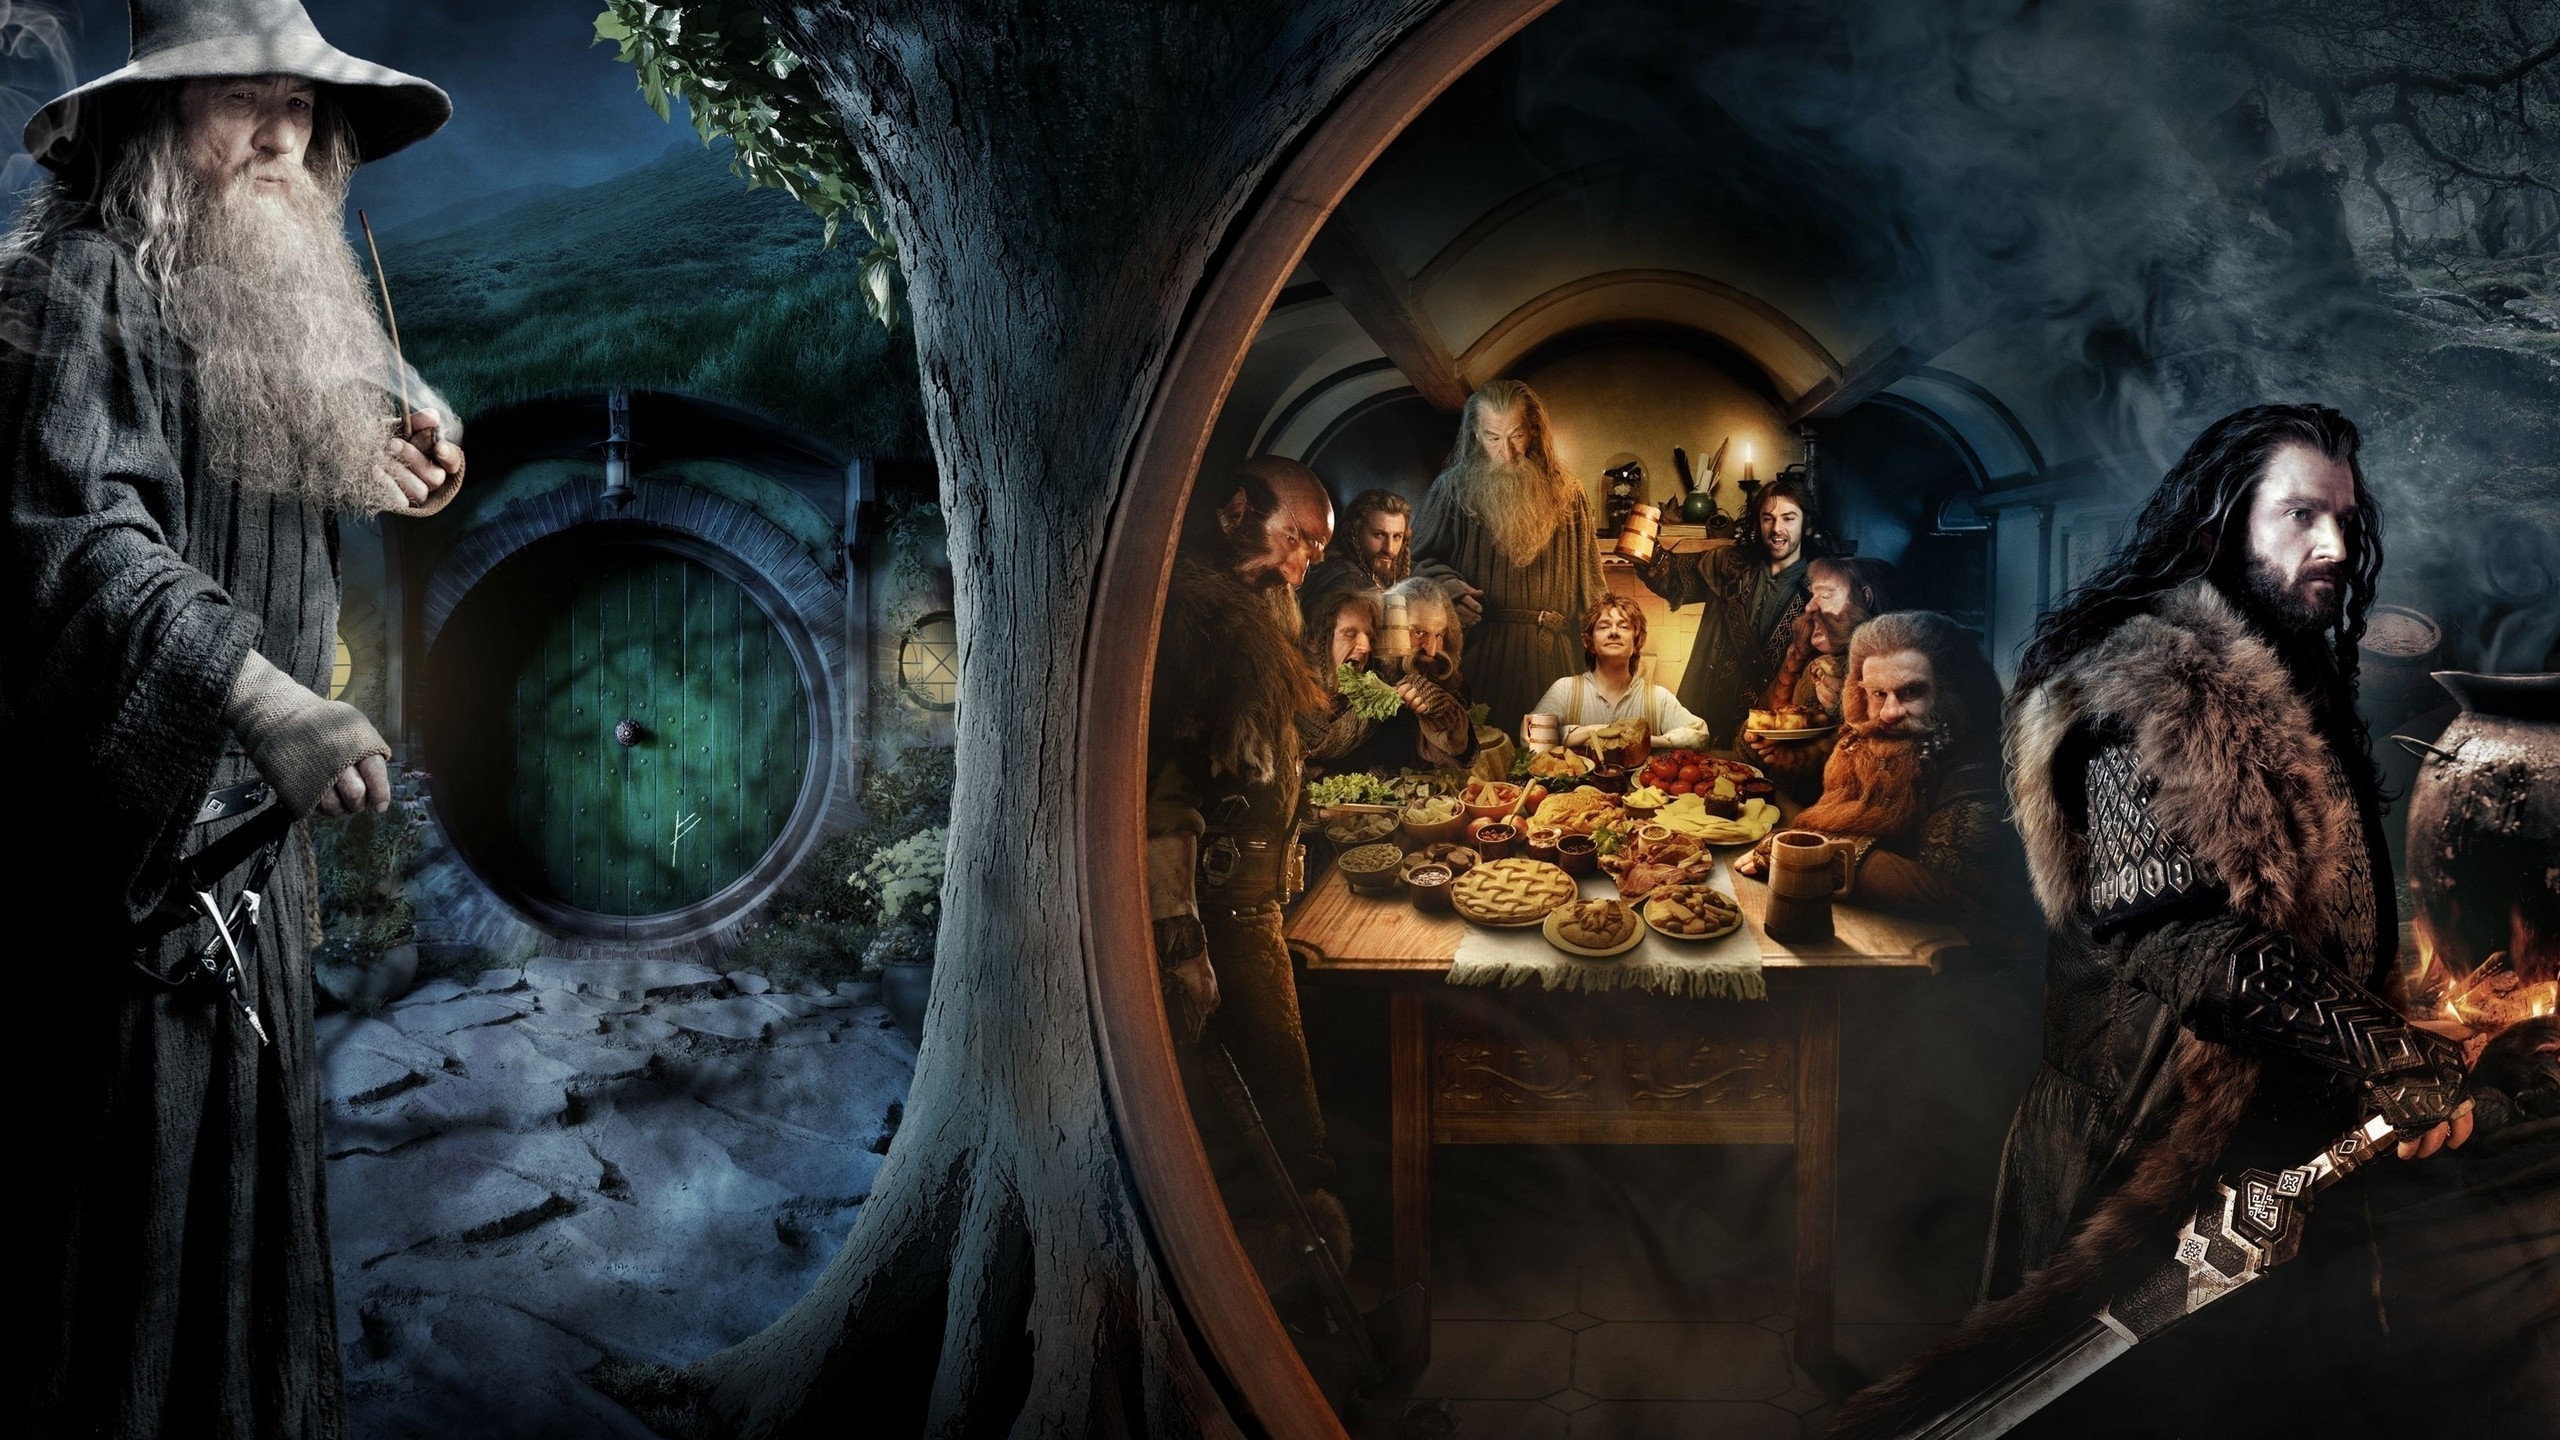 The Hobbit an Unexpected Journey 2012 for 2560x1440 HDTV resolution